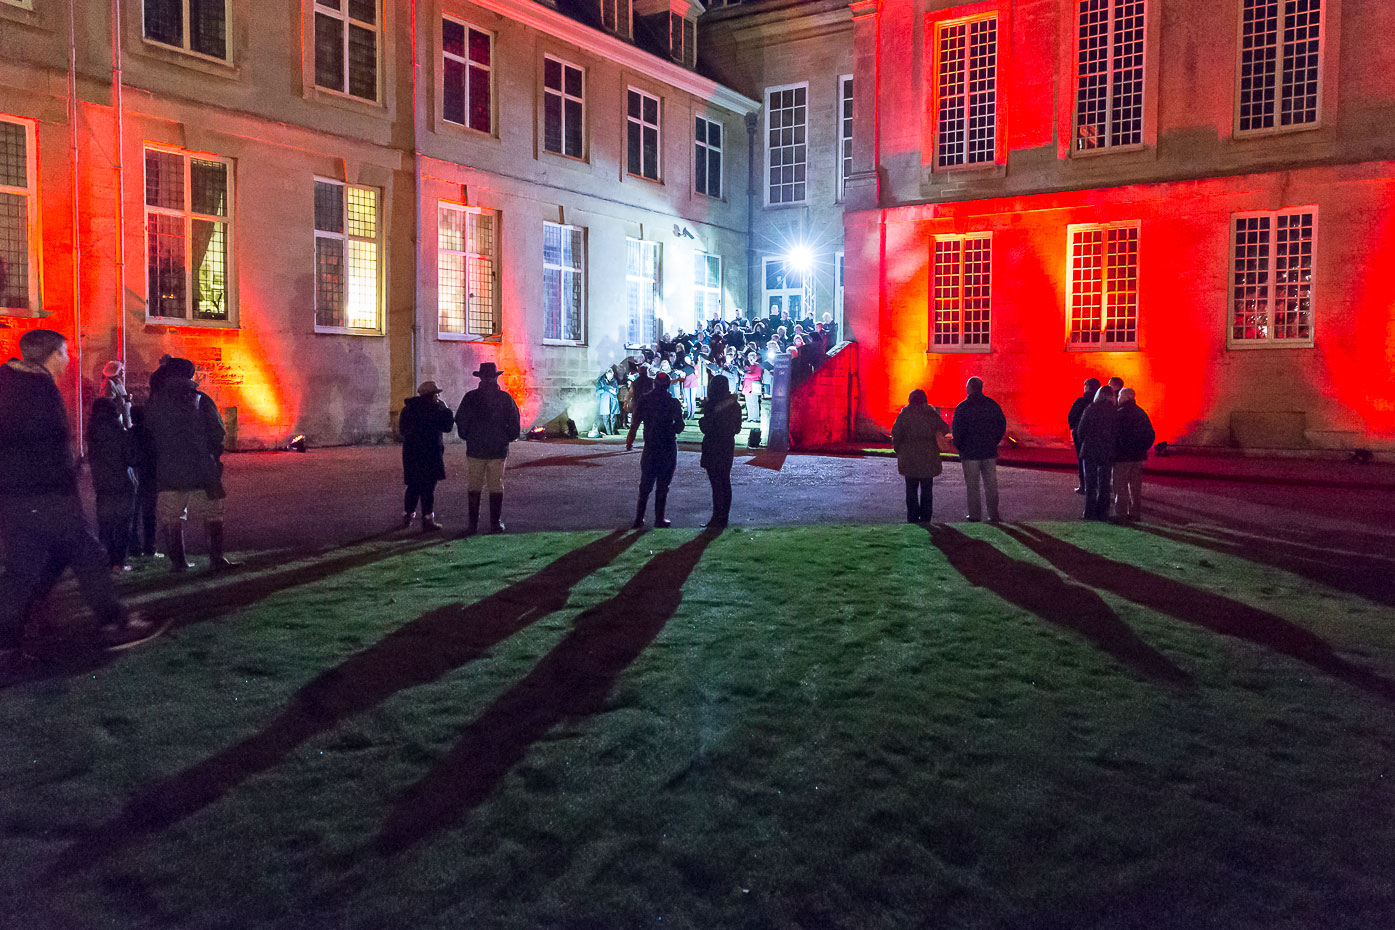 Boughton House 'Gunpowder, Treason and Plot' event, November 2014< >The choir assembled on the steps at Boughton House